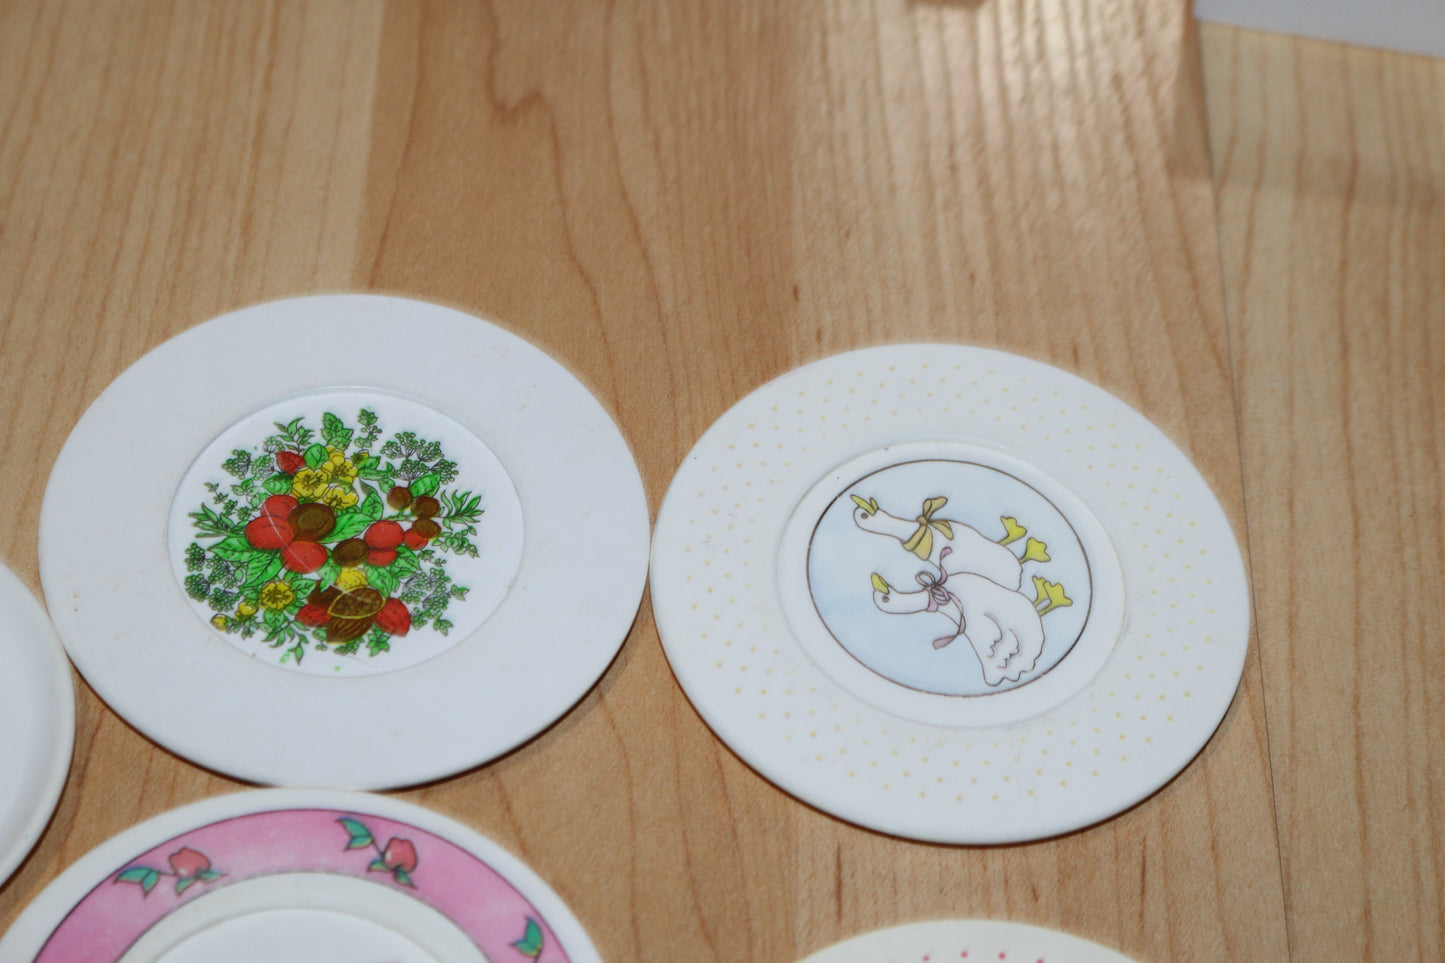 Chilton lot plates plastic toys accessories child play vintage collectible dolls